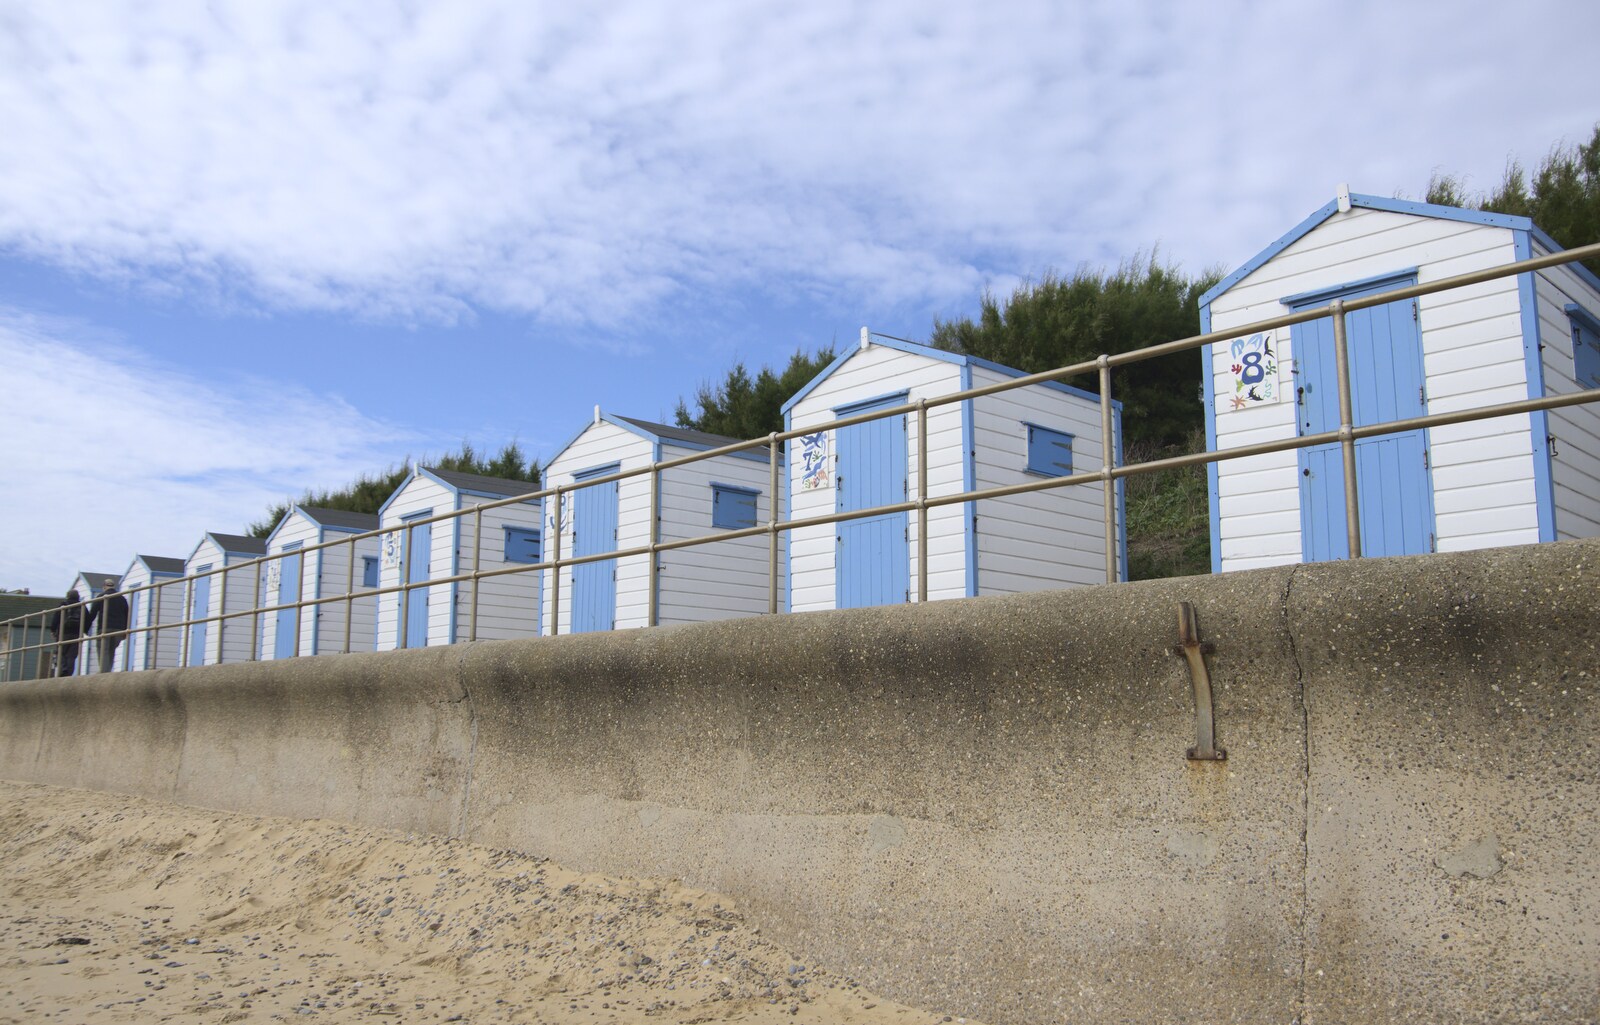 More Southwold beach huts from The Waverley Paddle Steamer at Southwold Pier, Suffolk - 27th September 2023